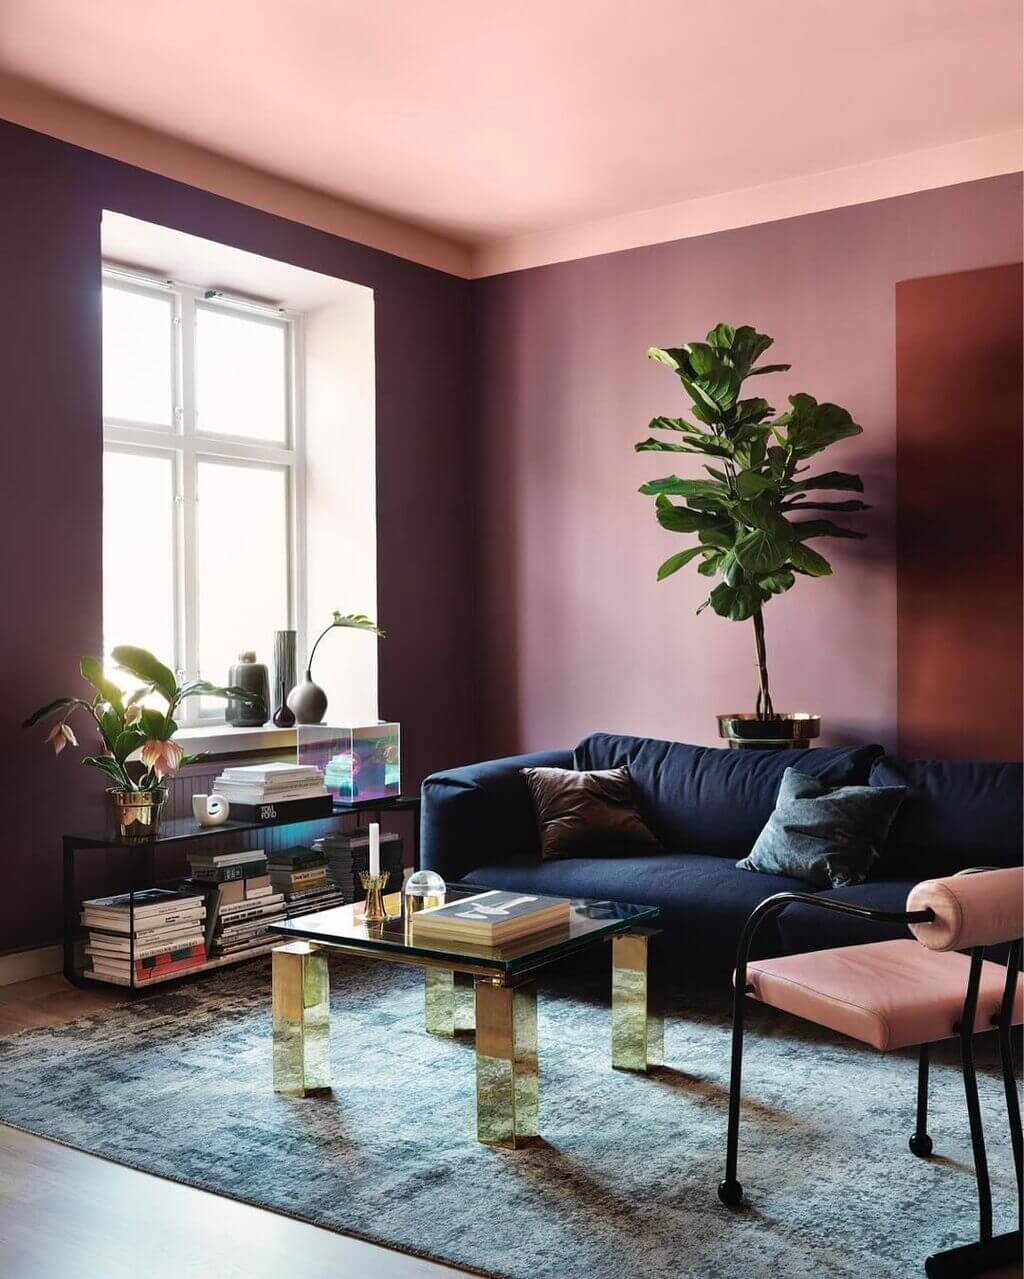 A living room with purple walls and a blue couch
